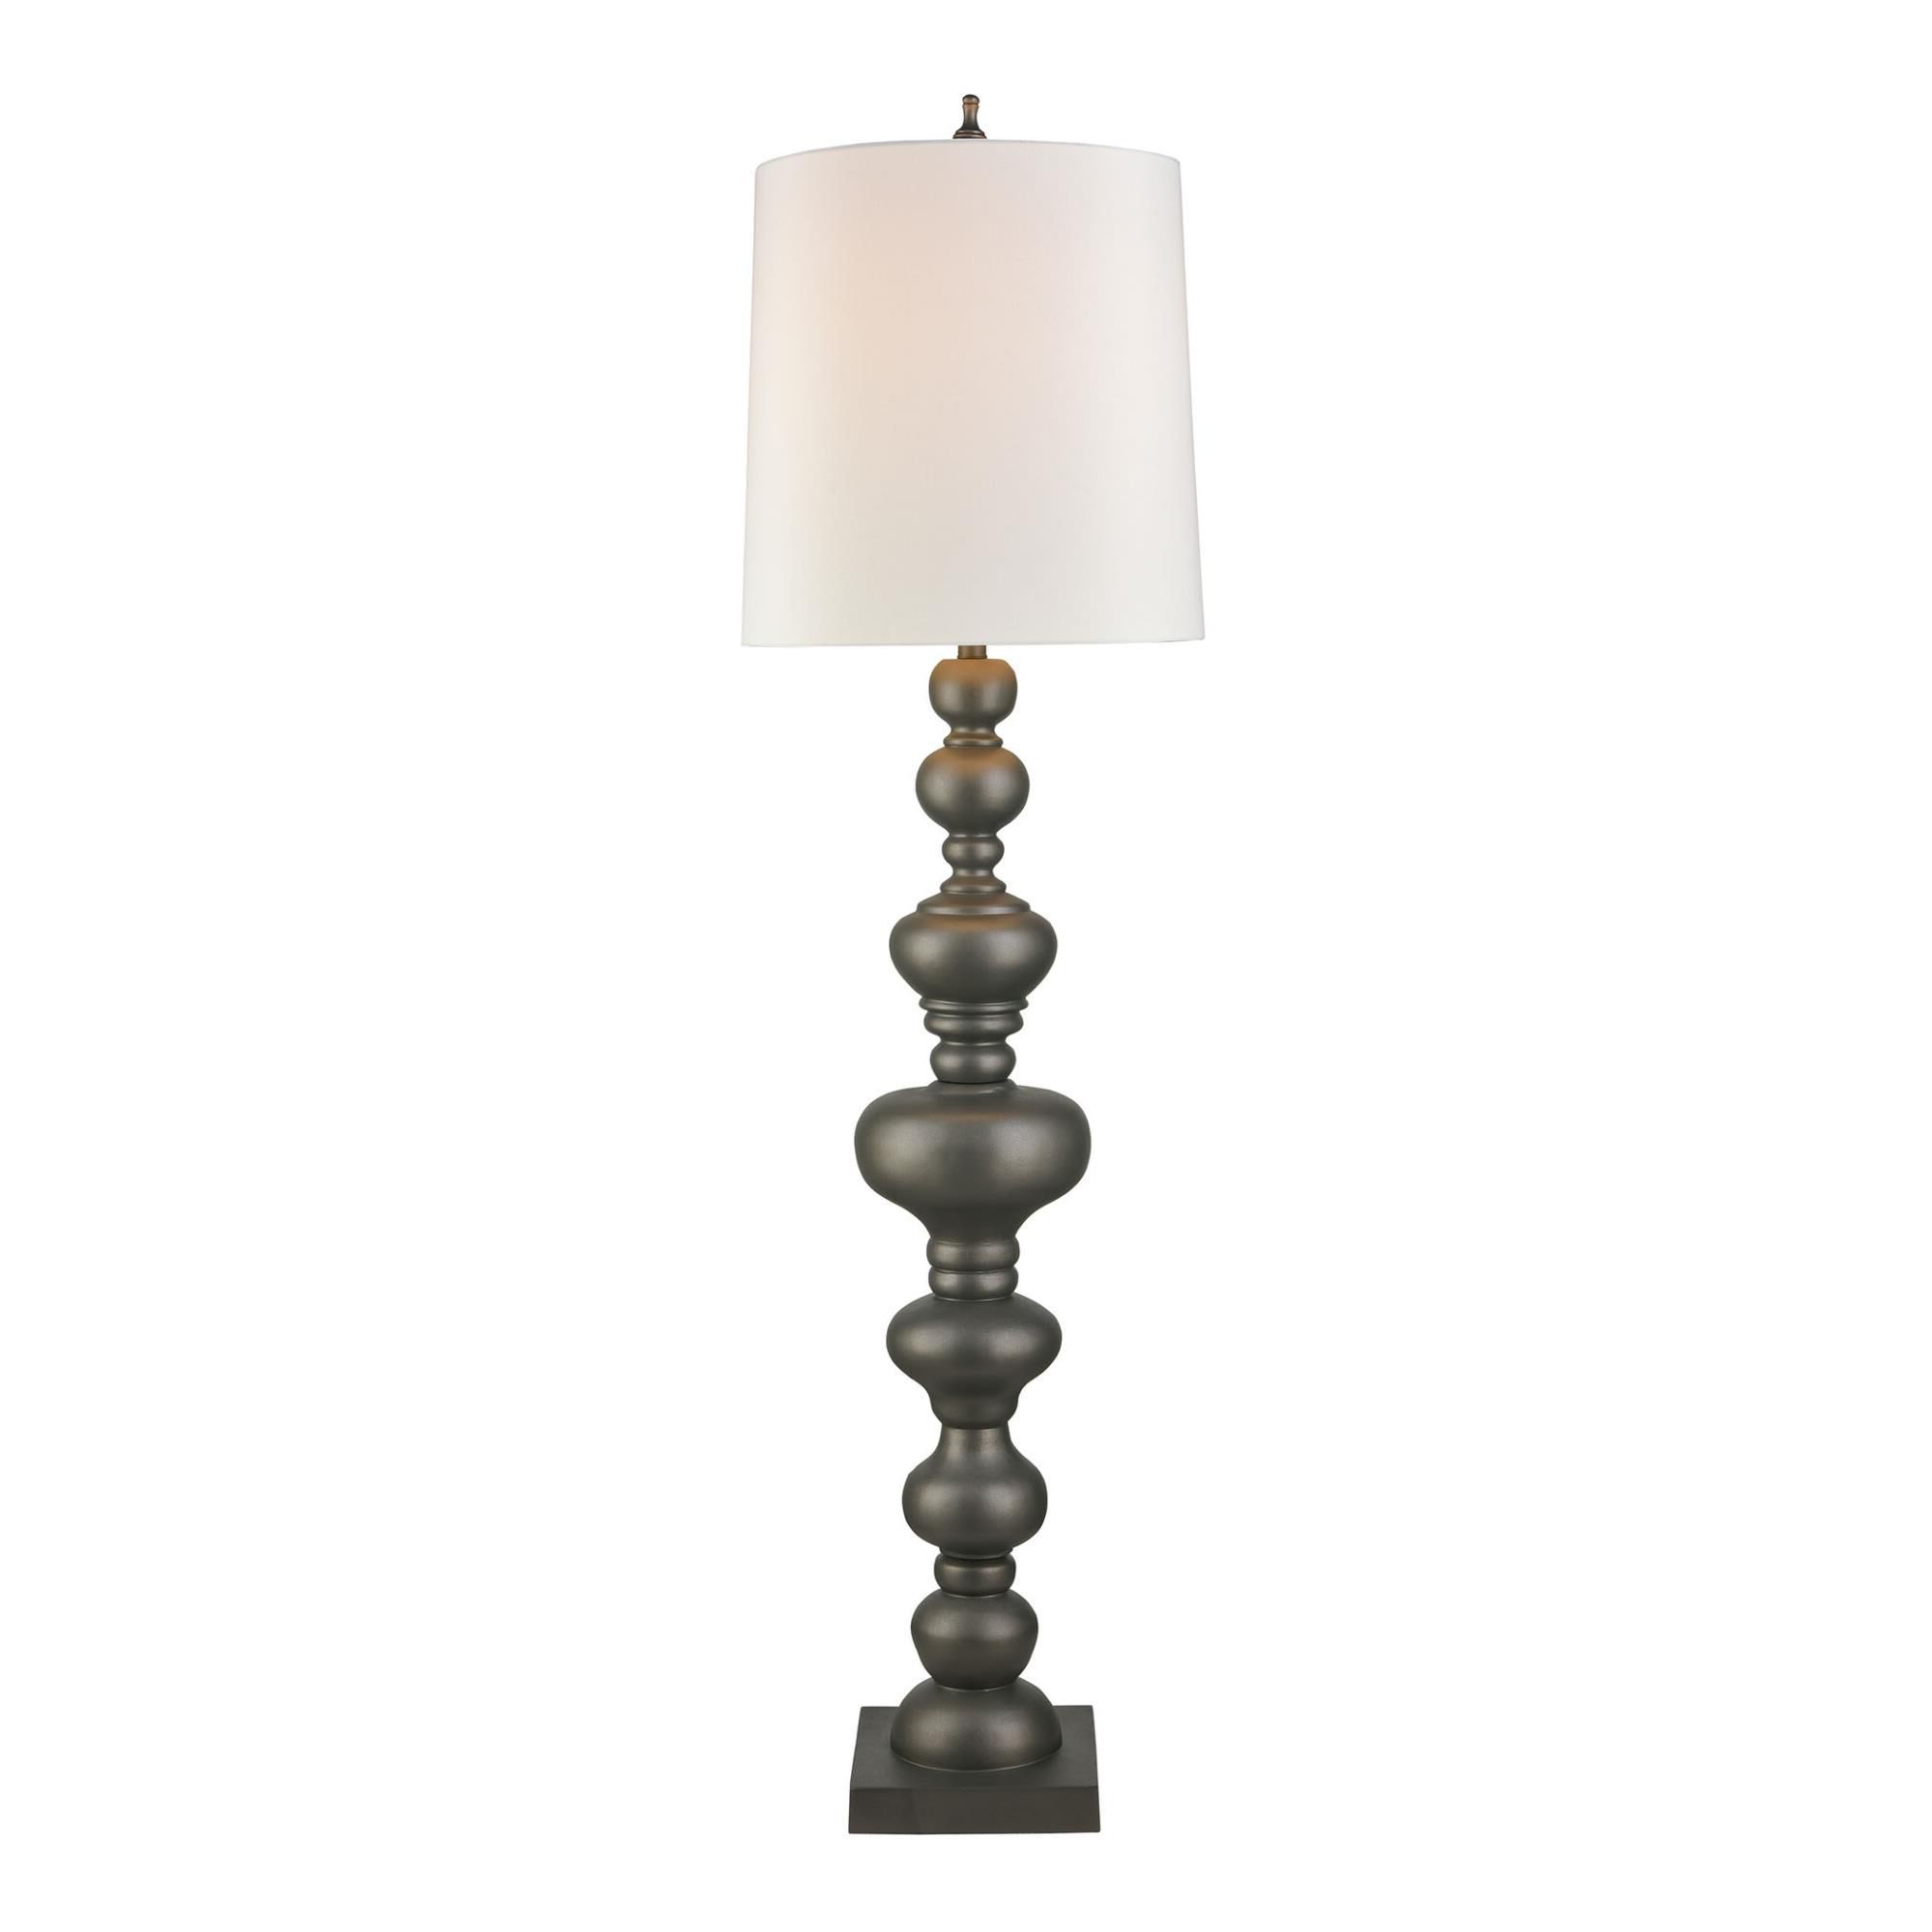 Aspermont 63 Inch Floor Lamp | Capitol Lighting Intended For 74 Inch Floor Lamps (Gallery 20 of 20)